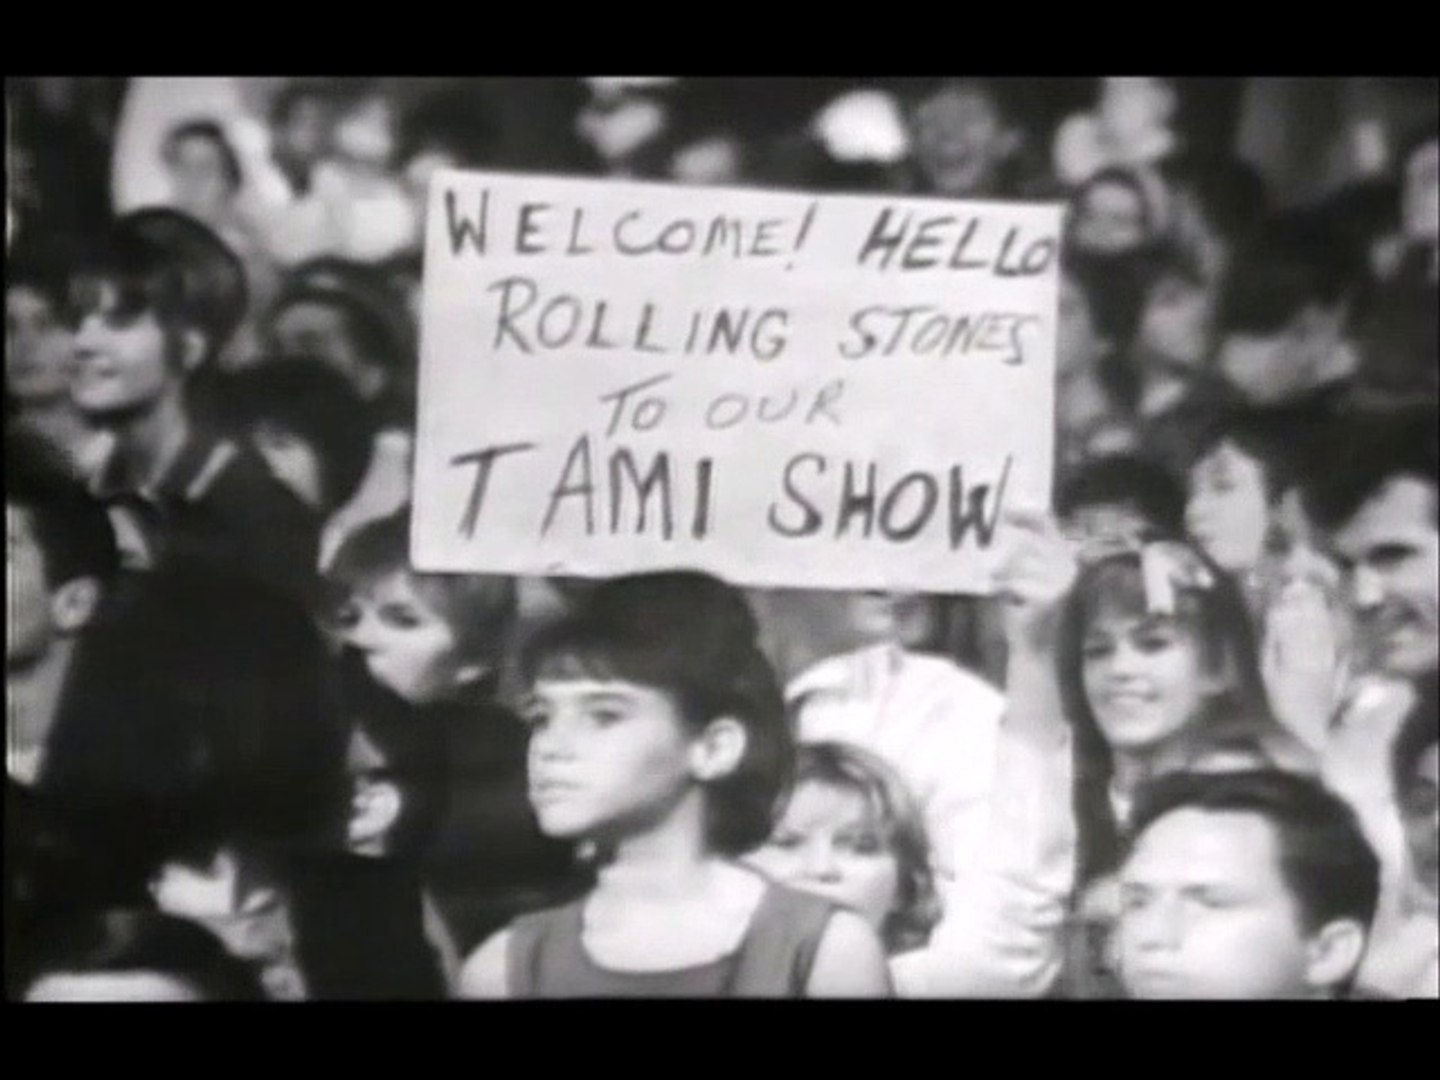 Rolling Stones - Around and around T.A.M.I. Show 10-29-1964 - Video  Dailymotion